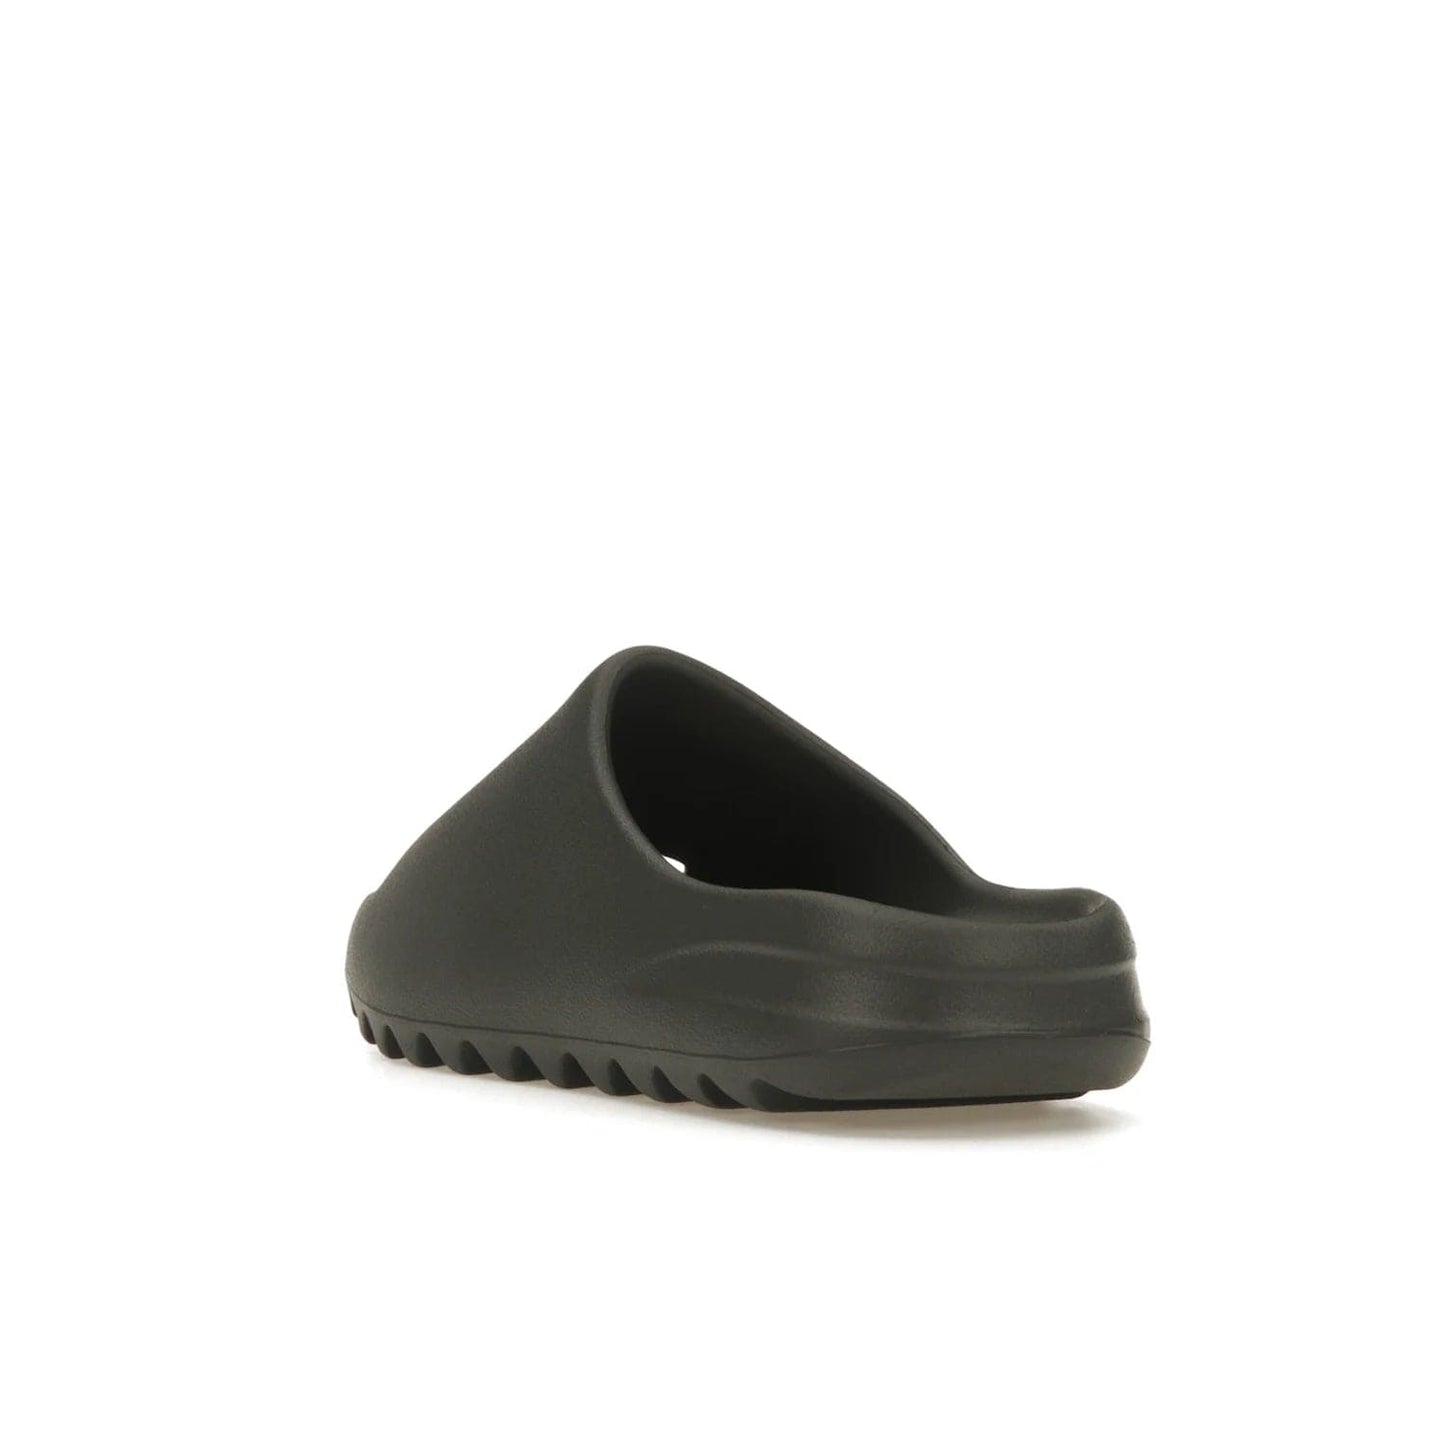 adidas Yeezy Slide Granite - Image 25 - Only at www.BallersClubKickz.com - Introducing the adidas Yeezy Slide Granite with a sleek, soft-to-touch one-piece upper – perfect for making a statement with its minimalistic design and luxurious comfort. Get yours now for only $70.